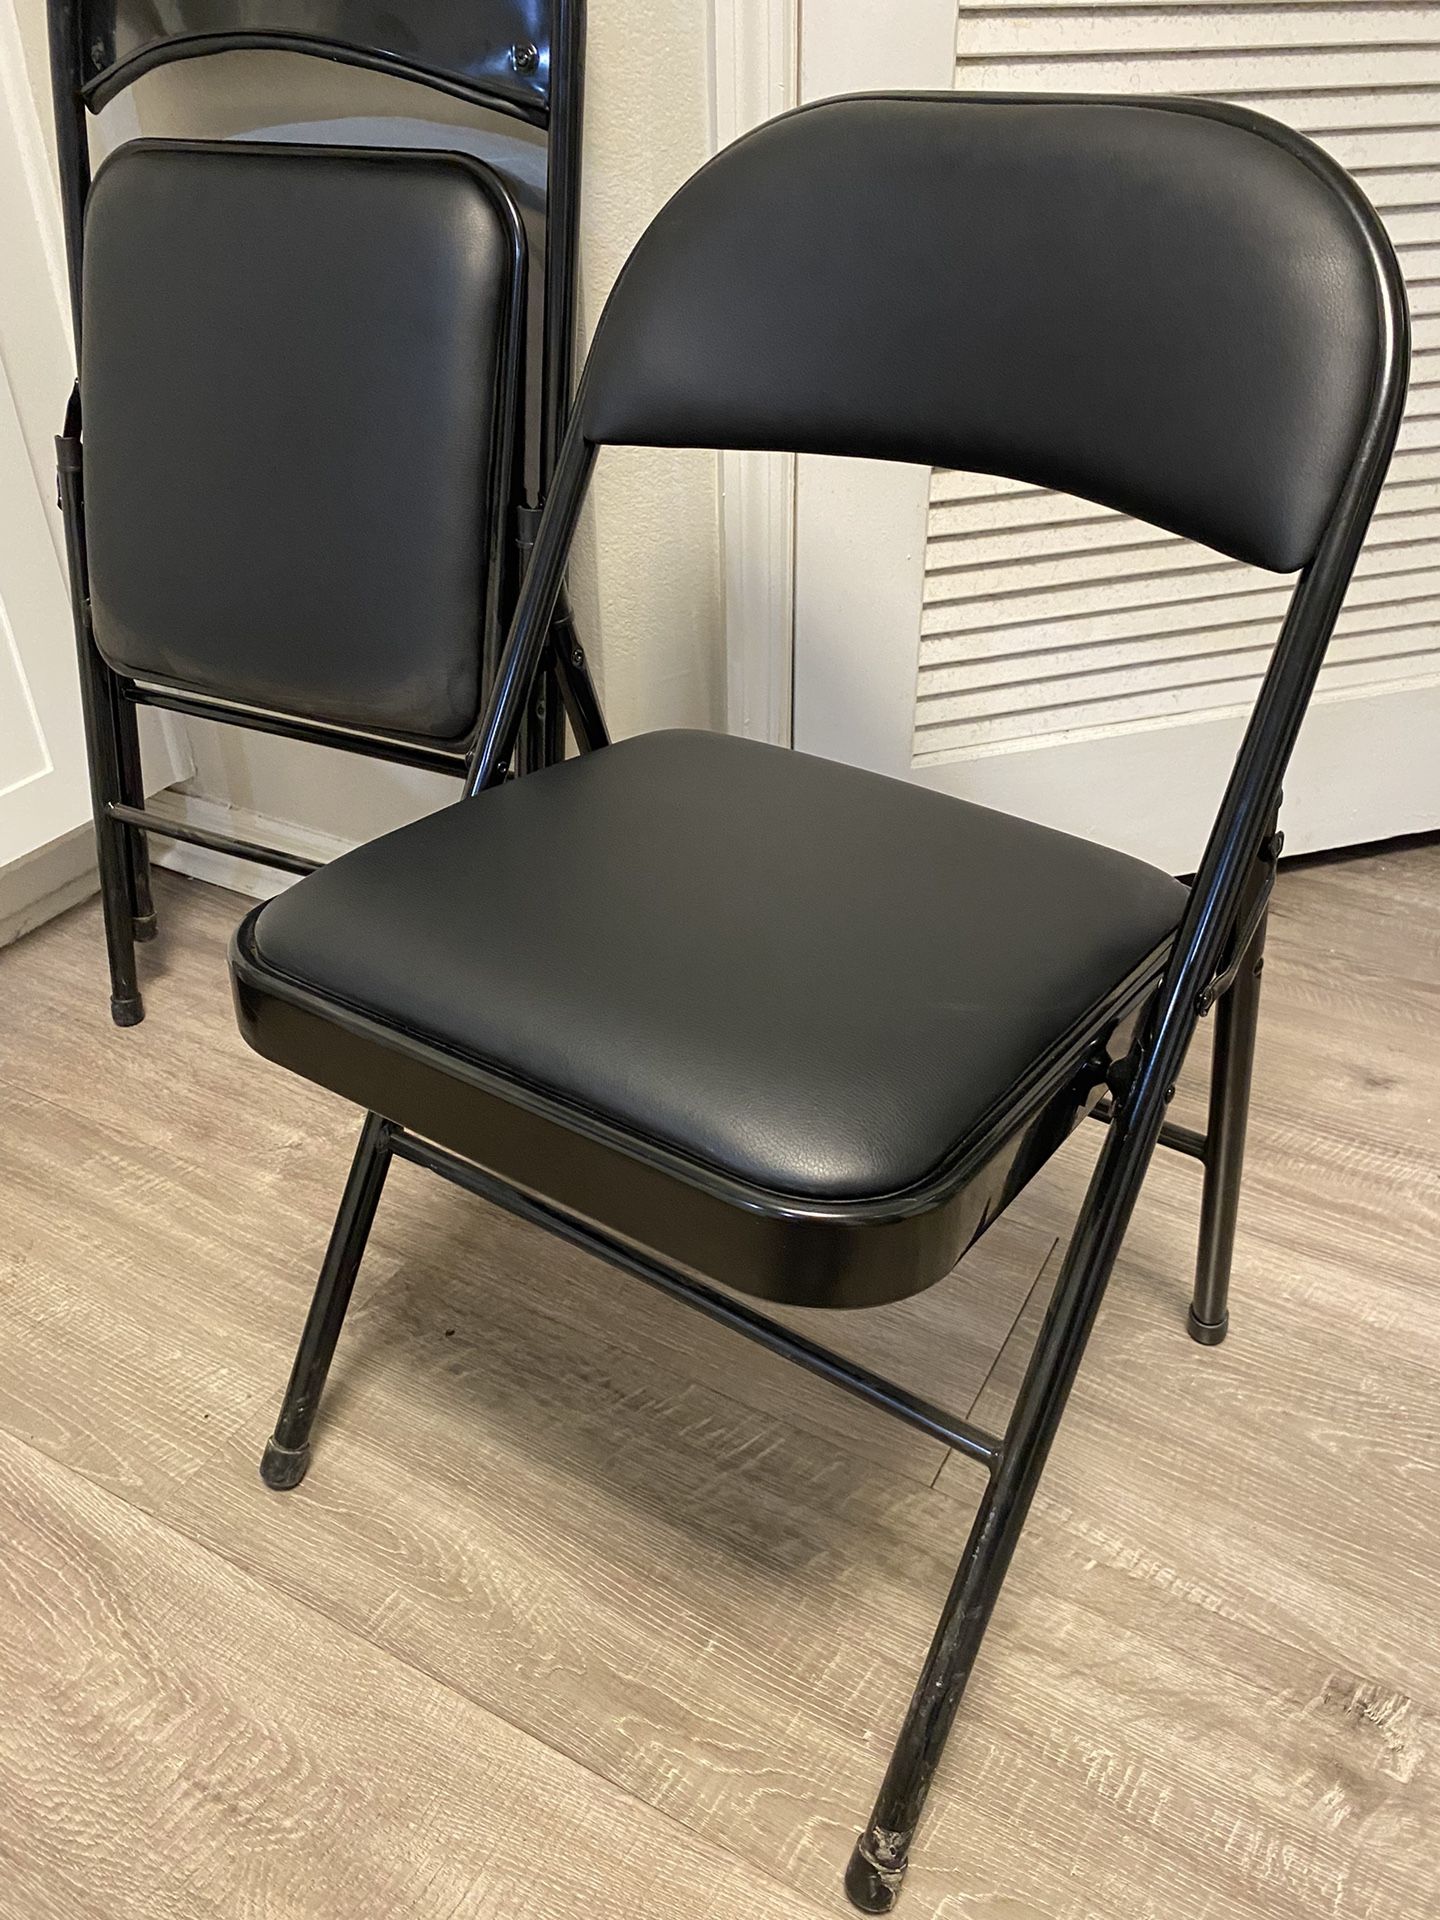 Black Leather Folding Chairs